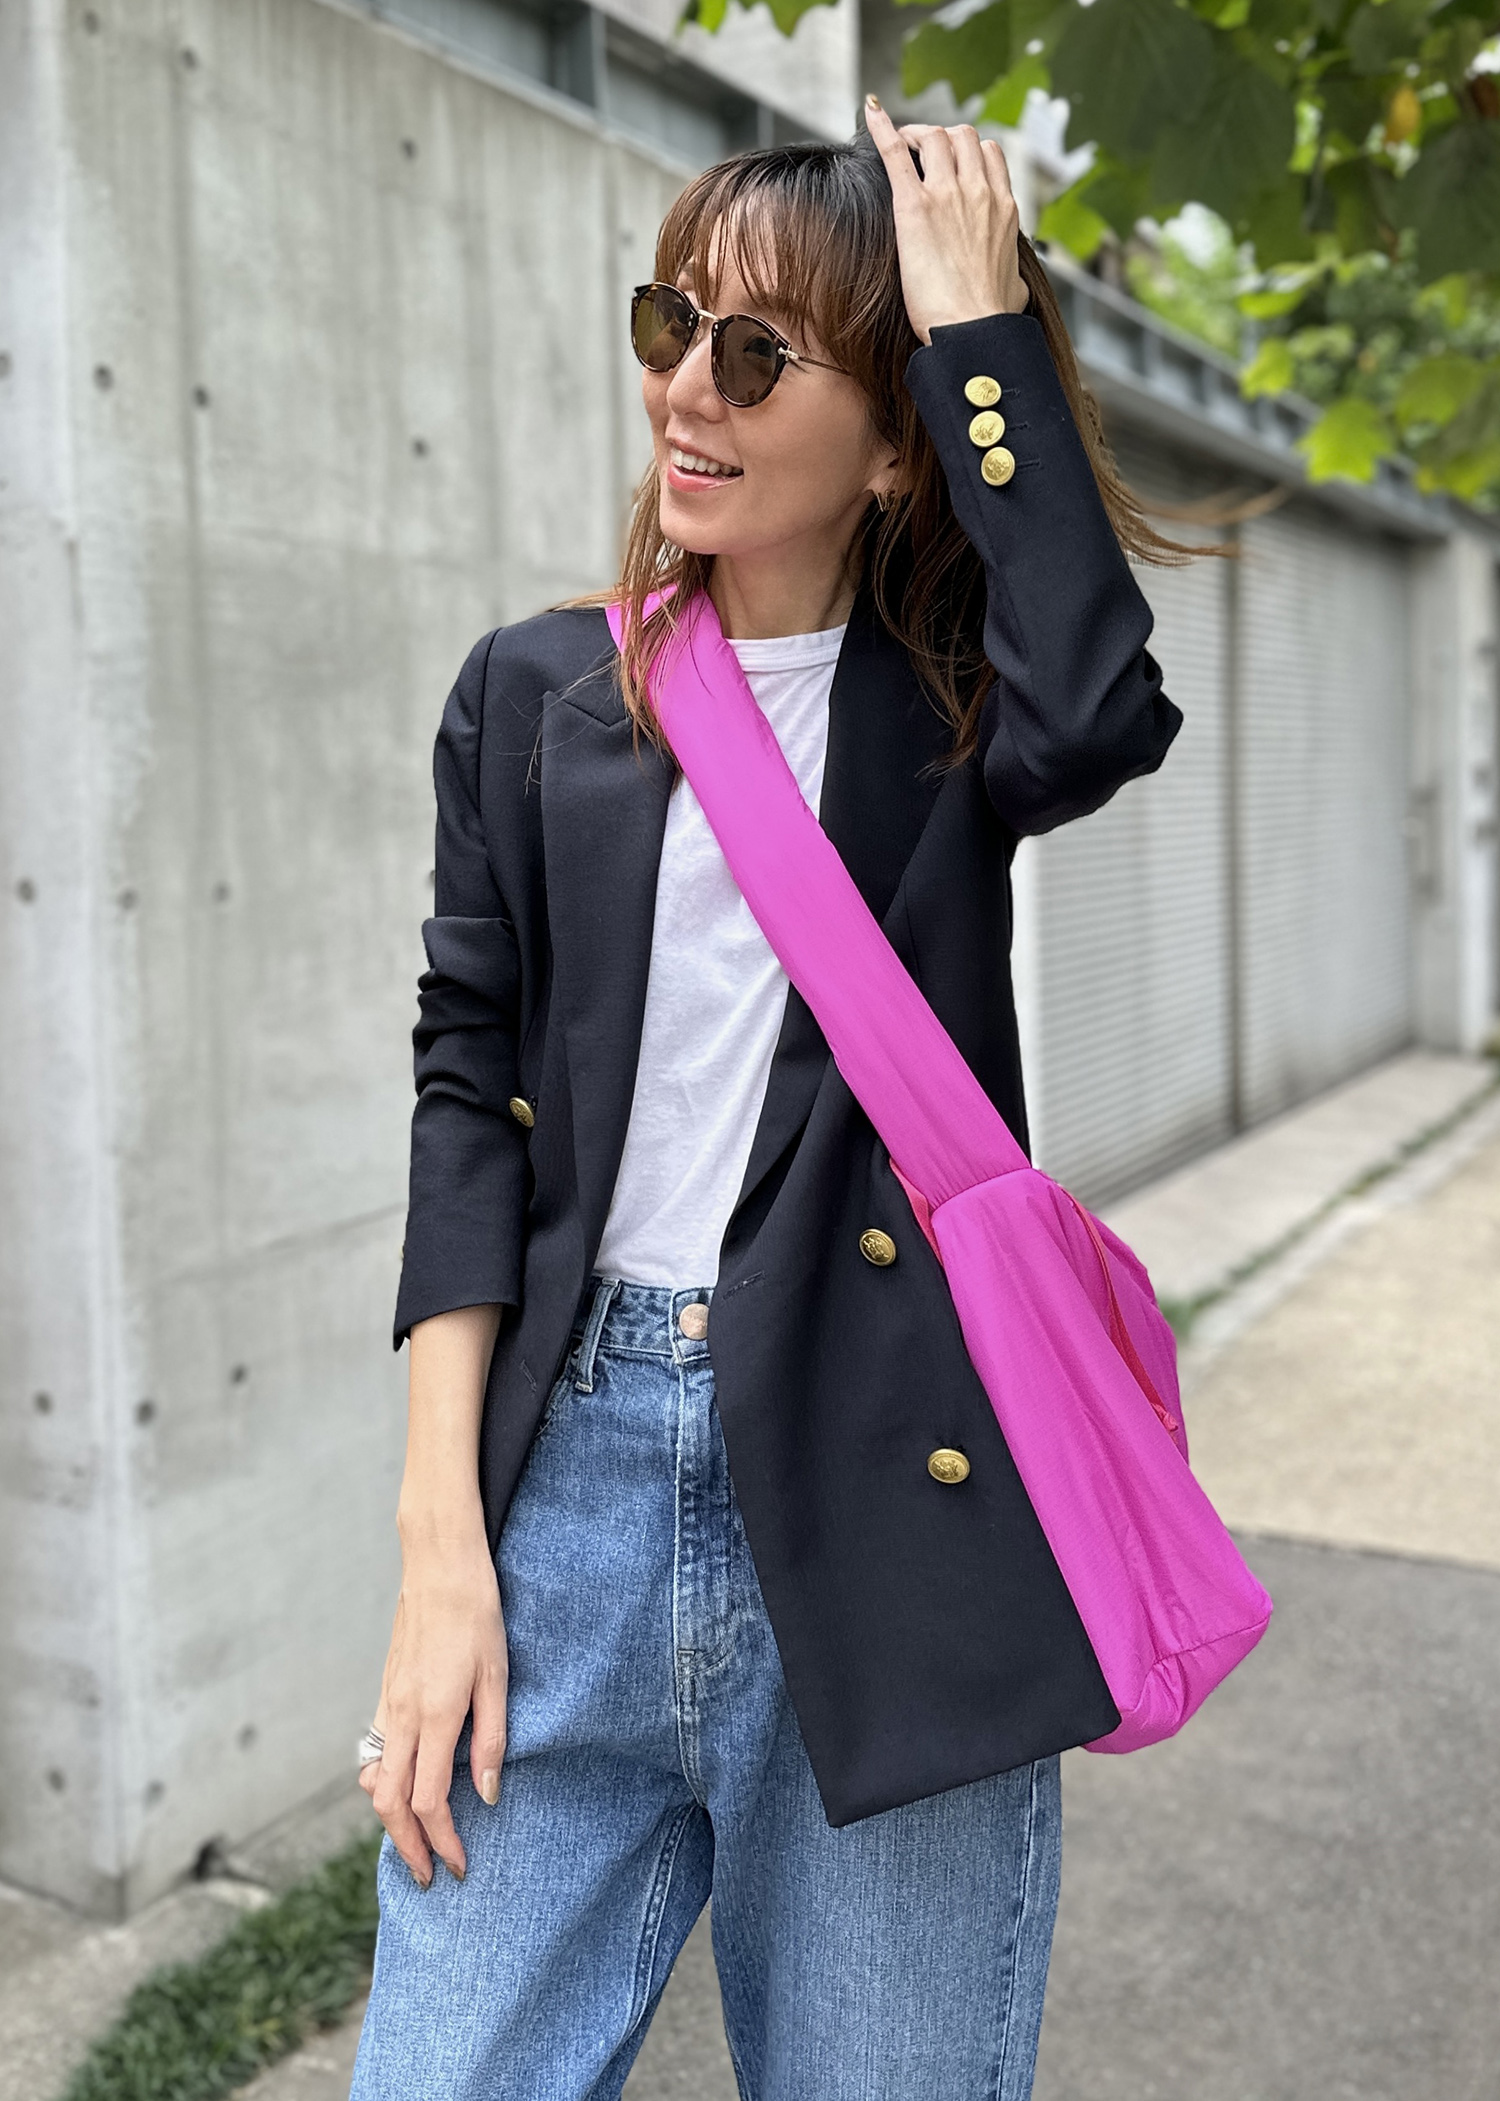 Her Denim Style One-Day -RED CARD TOKYO-